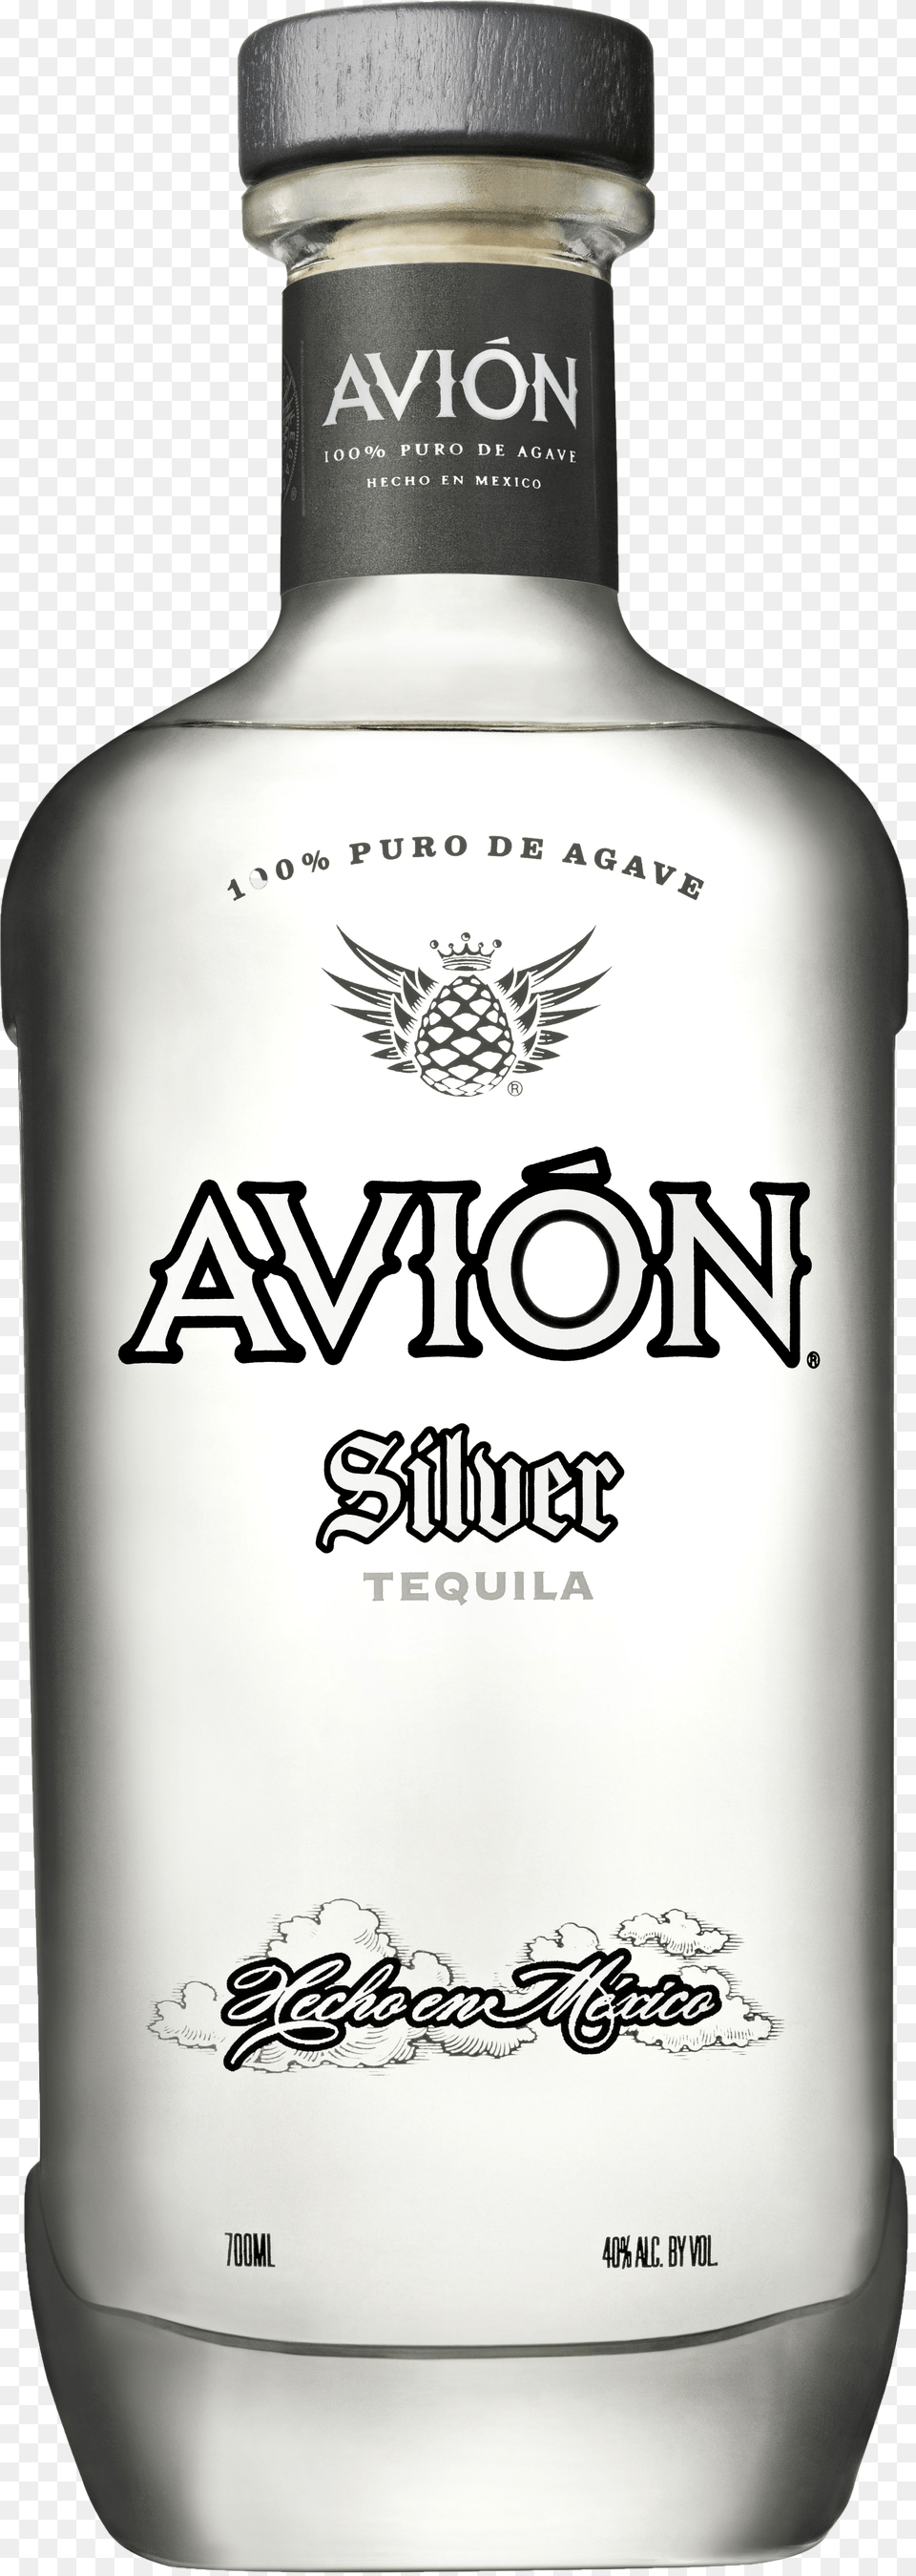 Avion Tequila Mexico Silver 375ml Bottle Tequila Avion Blanco, Art Png Image